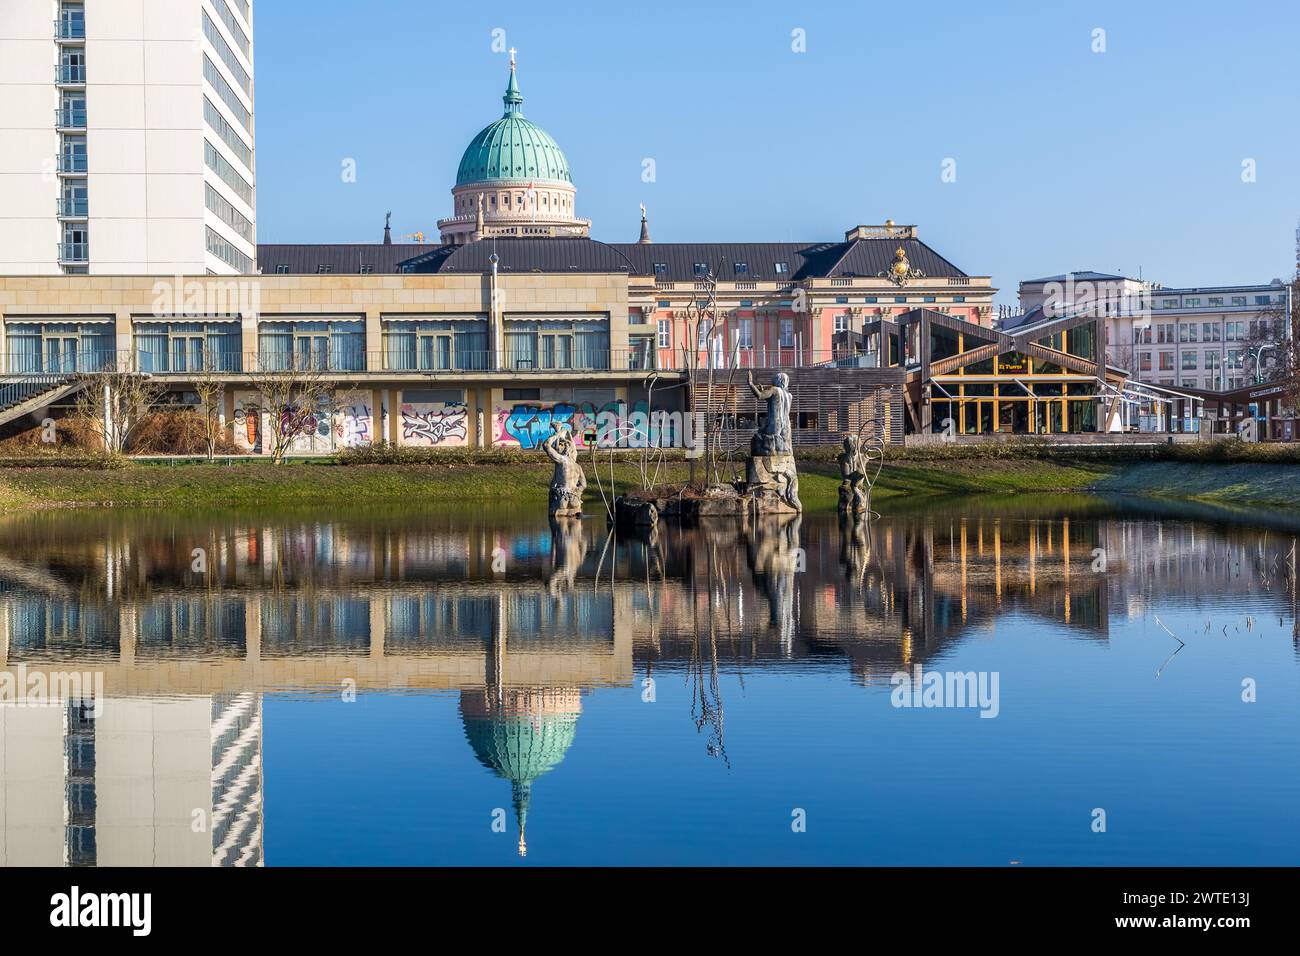 City view of Potsdam with the façade of the former city palace, the simple brutalist architecture of the Mercure Hotel and the Neptune Basin with steel fog light sculpture 'Neptune's Triumph'. Lustgarten, Potsdam, Brandenburg, Brandenburg, Germany Stock Photo